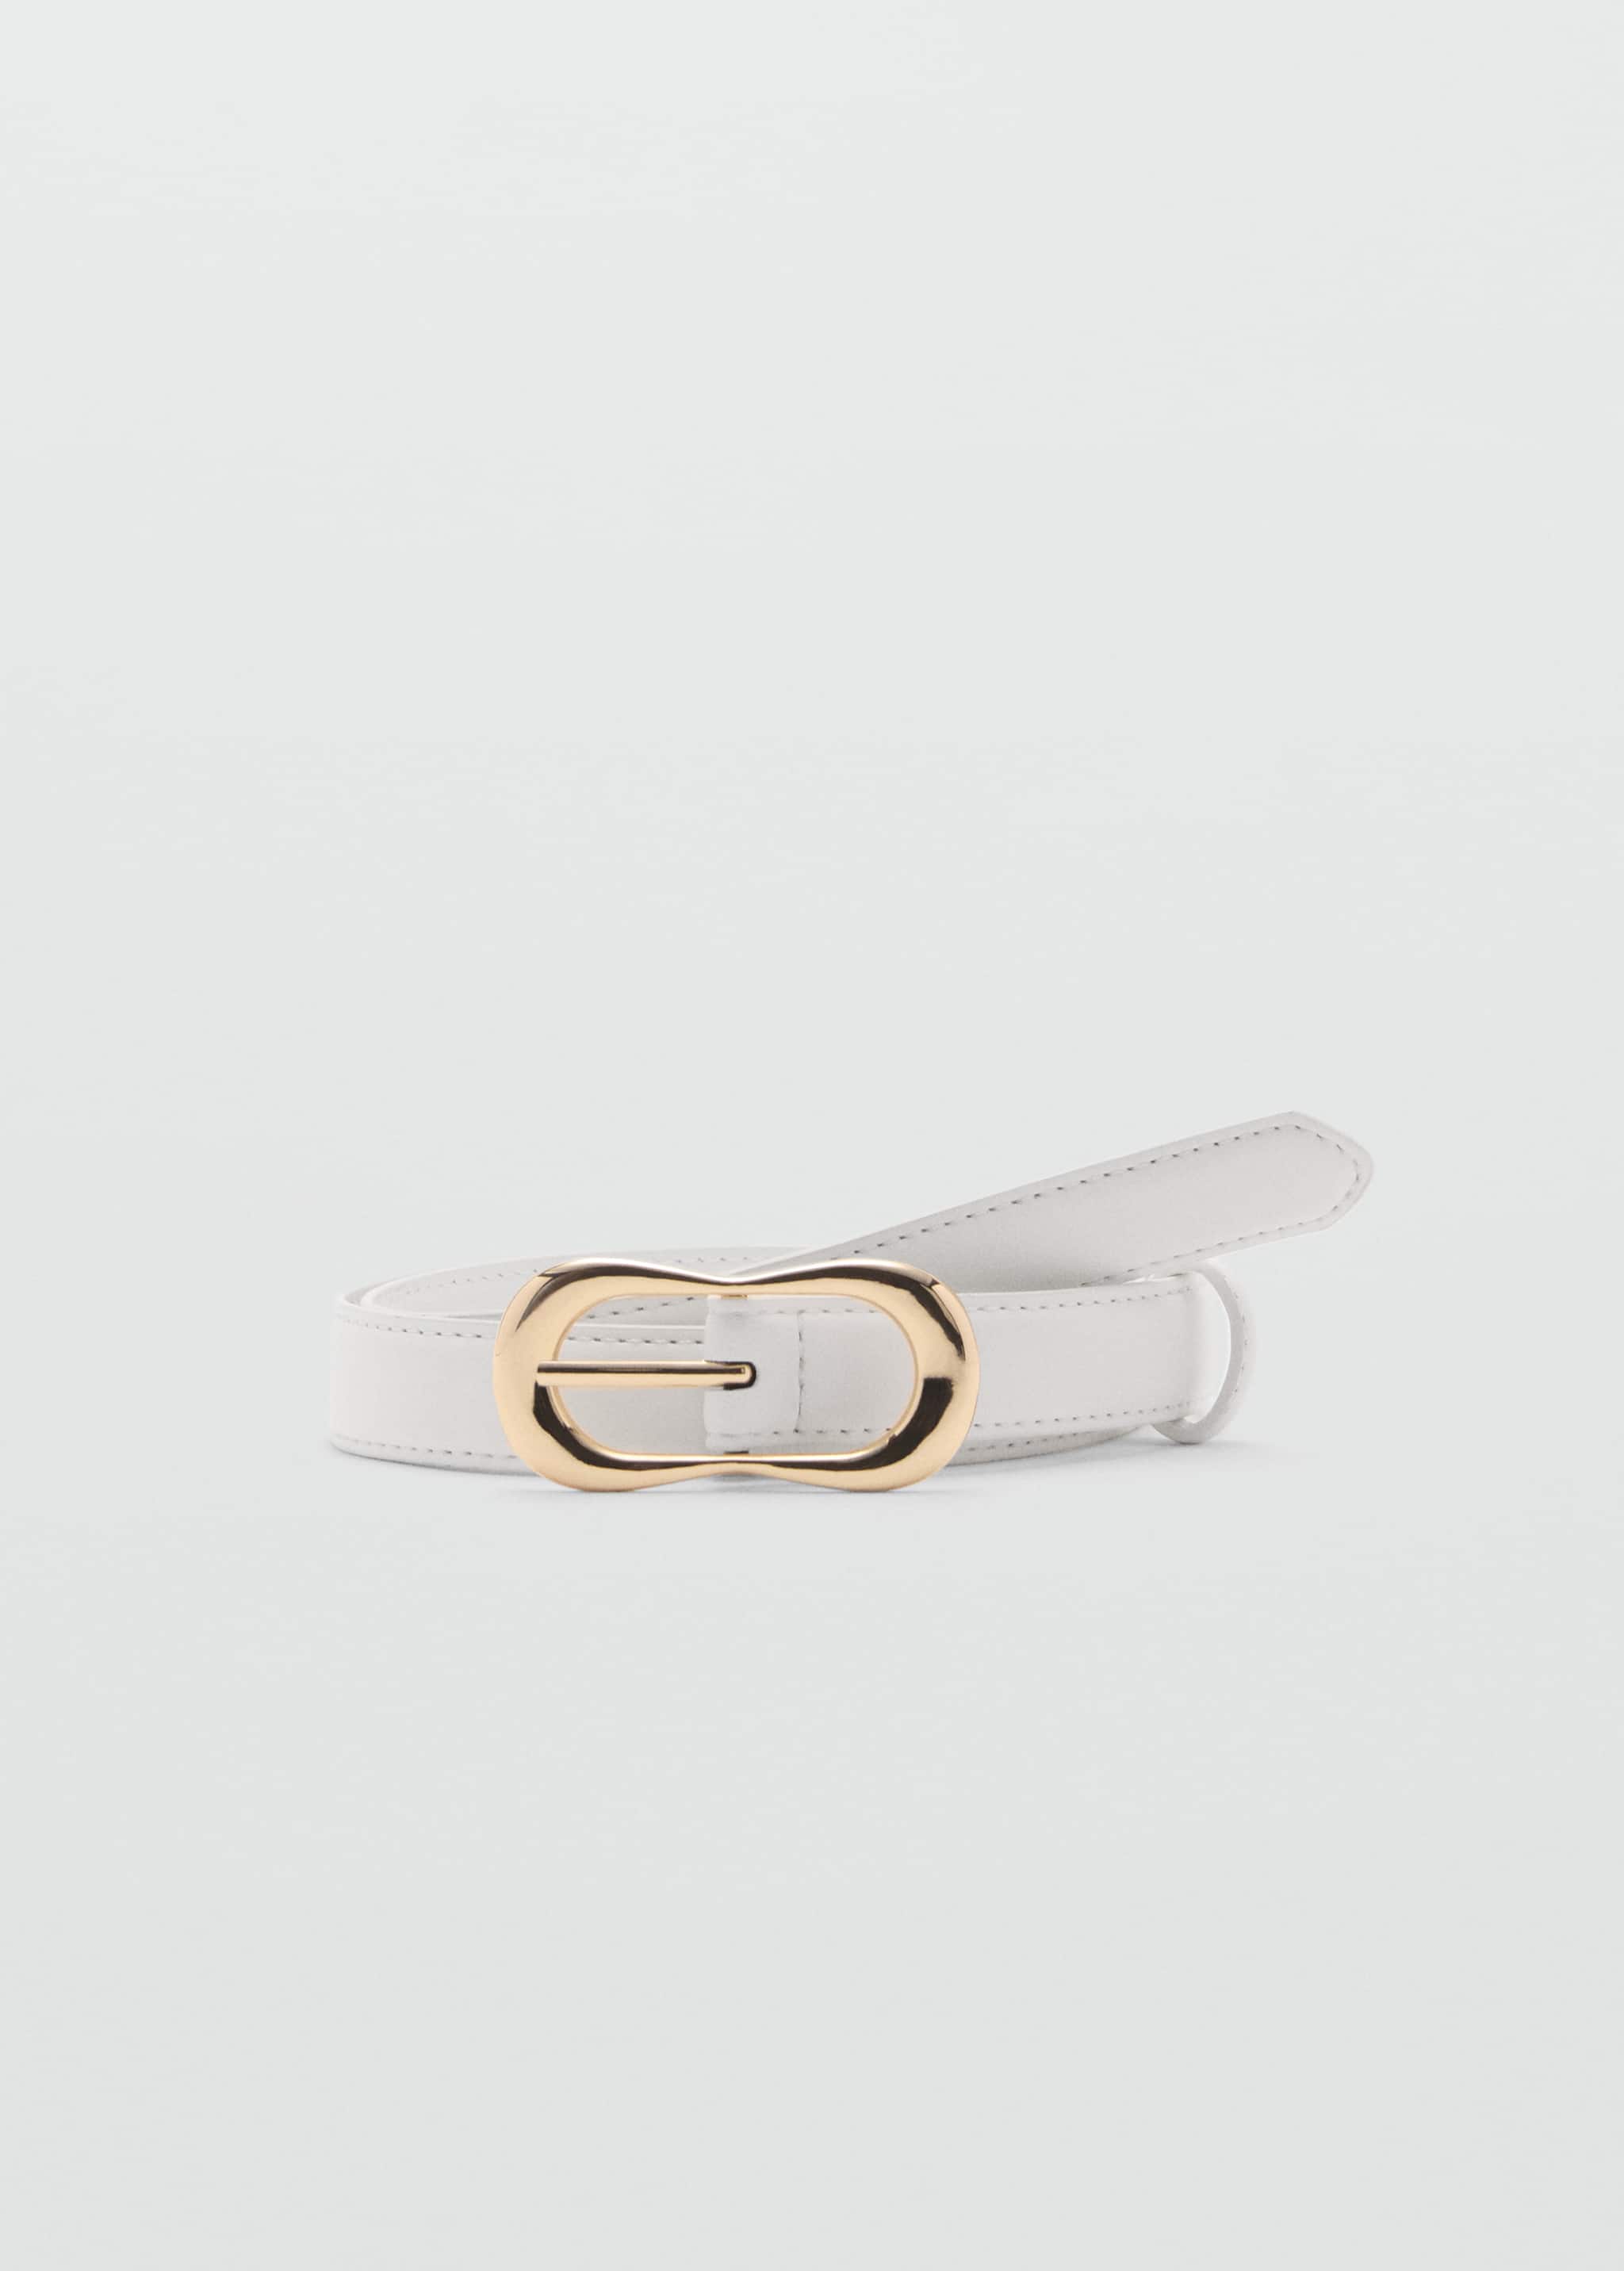 Buckle skinny belt - Article without model